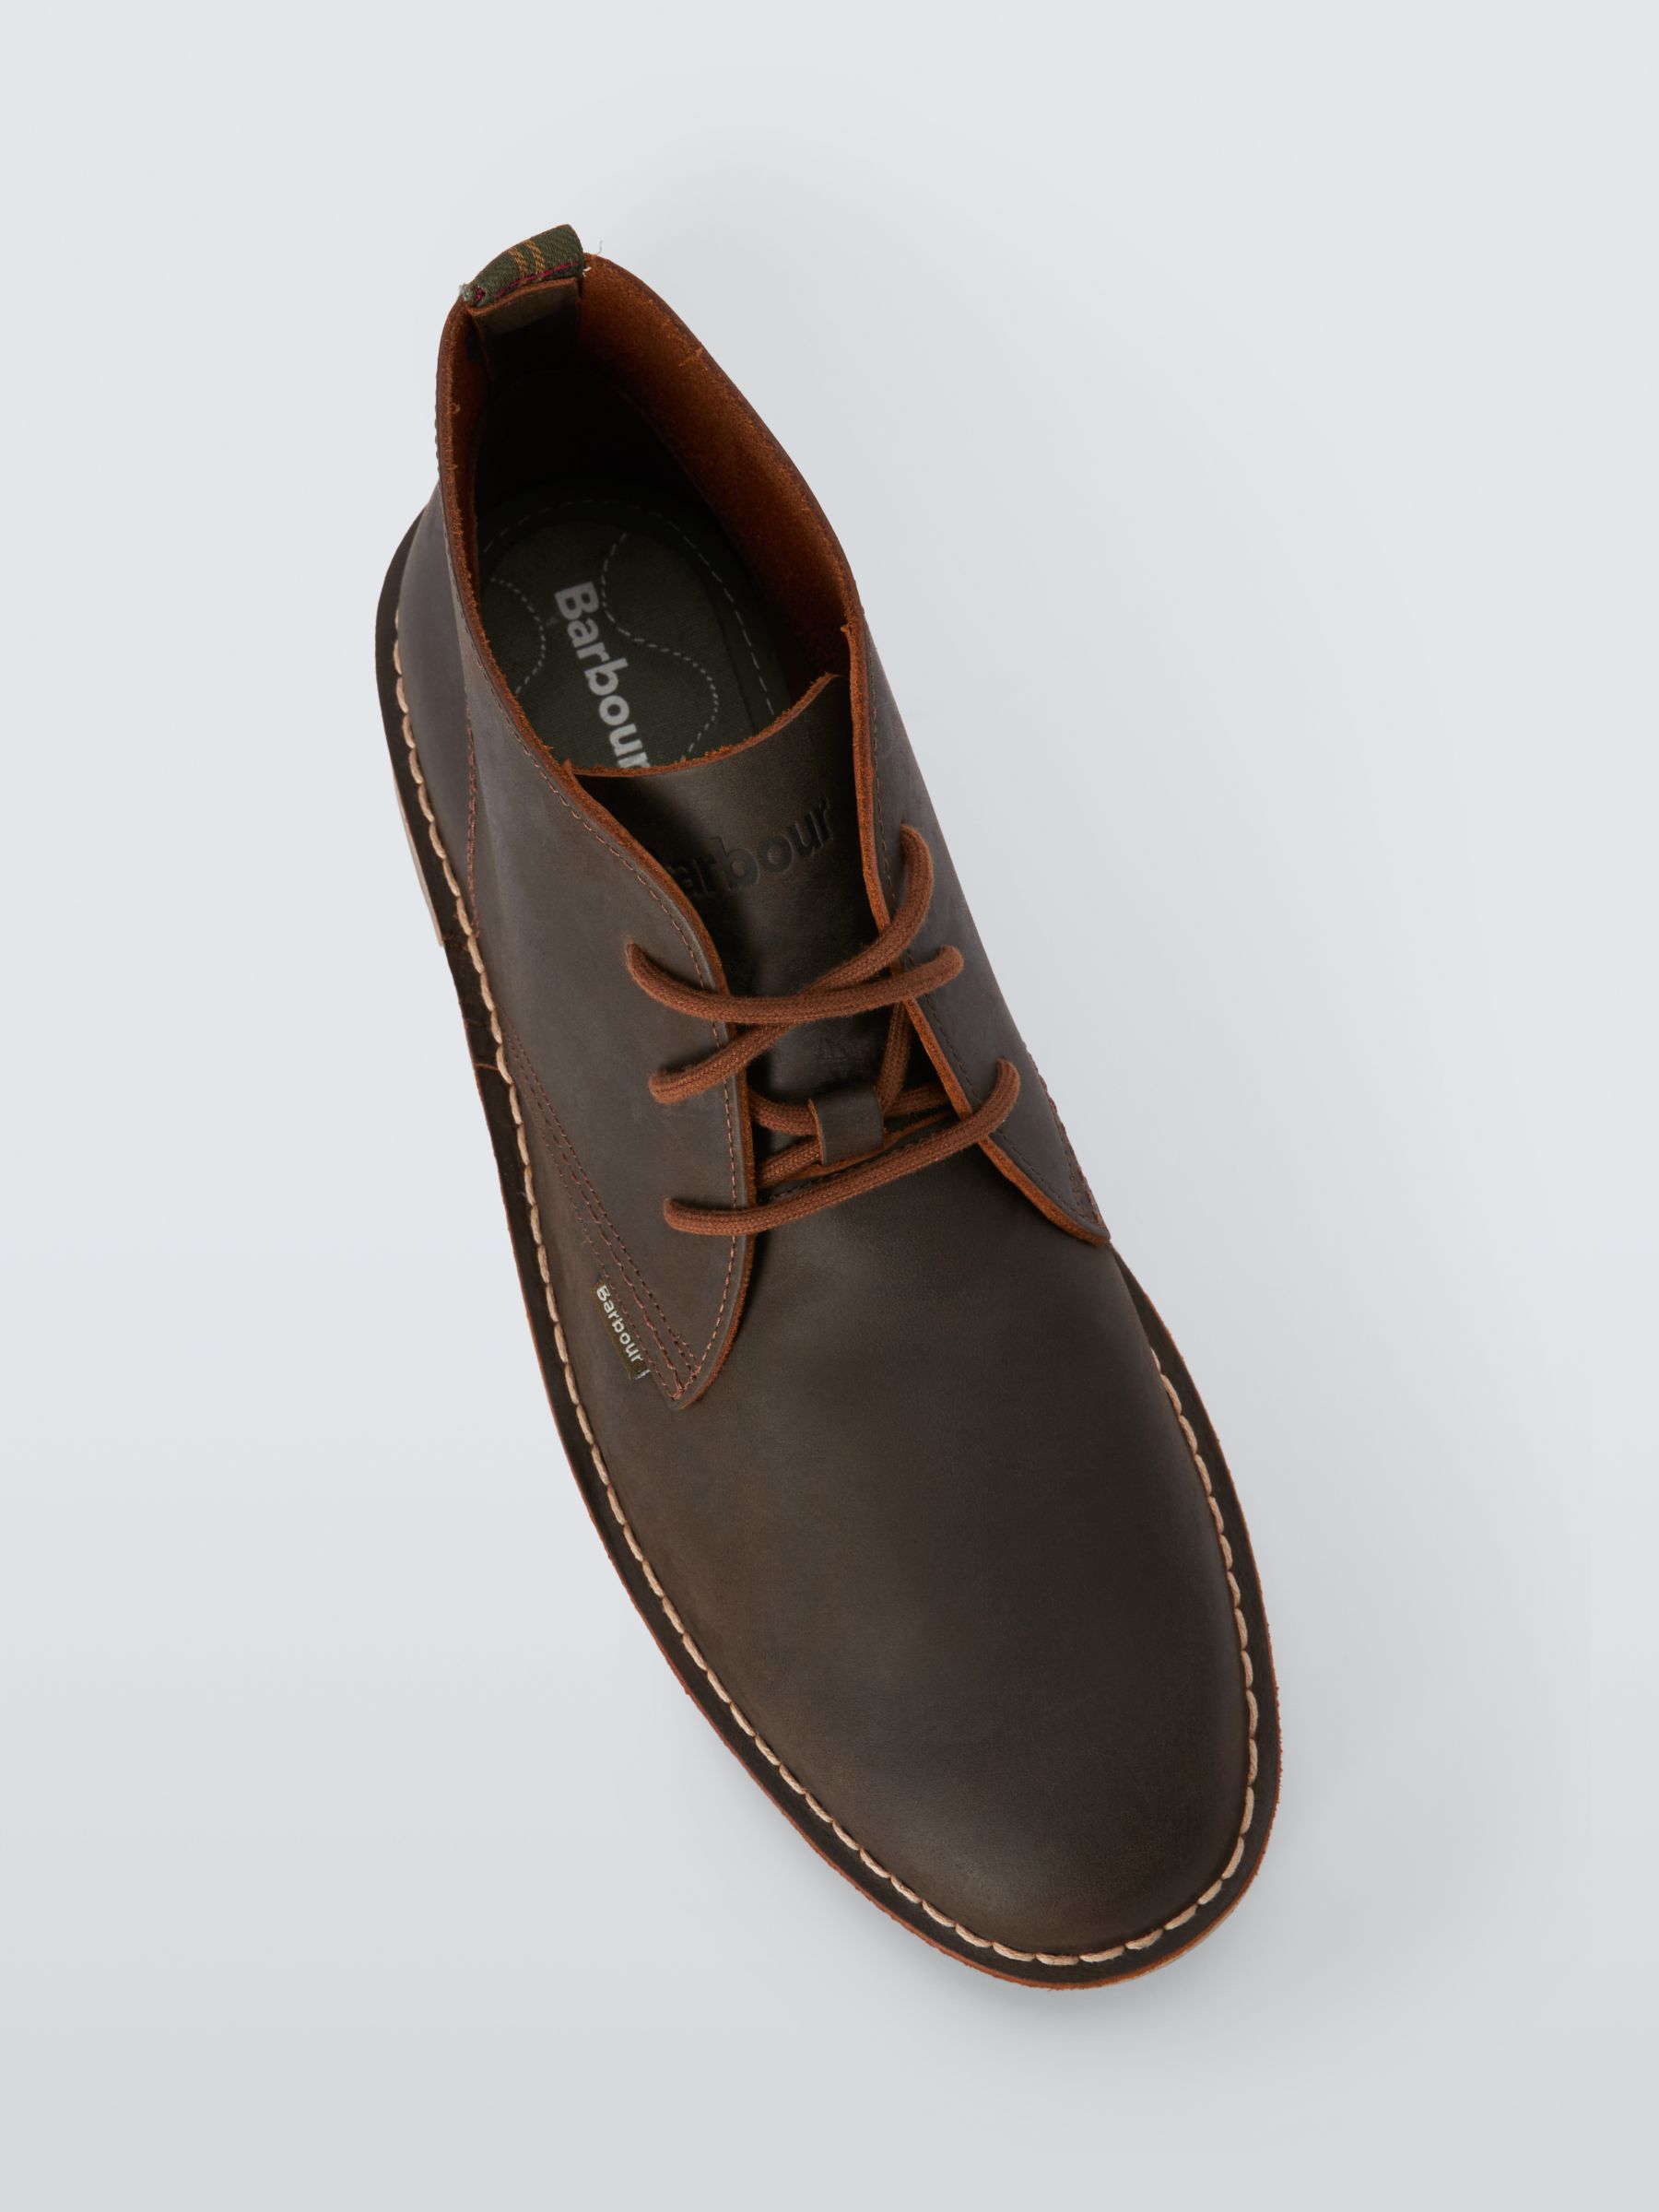 Buy Barbour Siton Leather Desert Boots, Beeswax Online at johnlewis.com